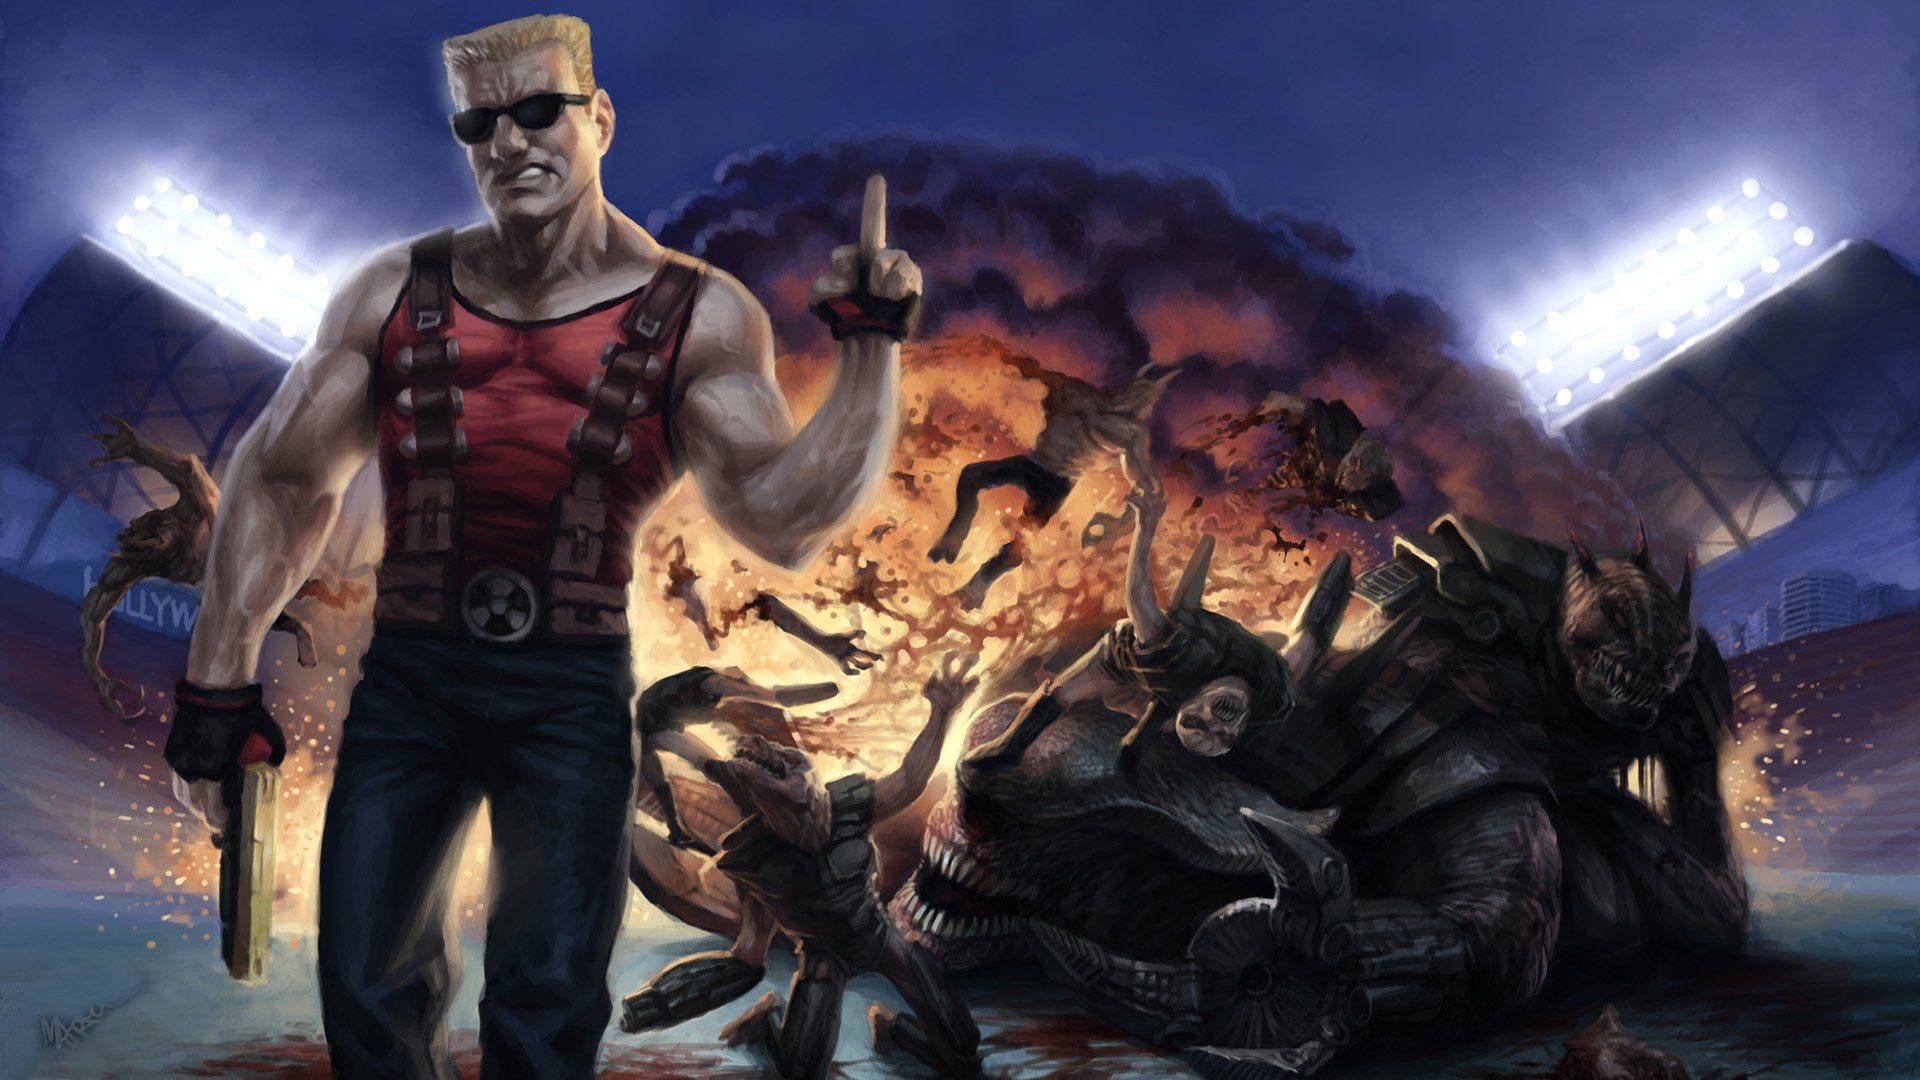 12 Duke Nukem Forever Hd Wallpapers Background Images Images, Photos, Reviews